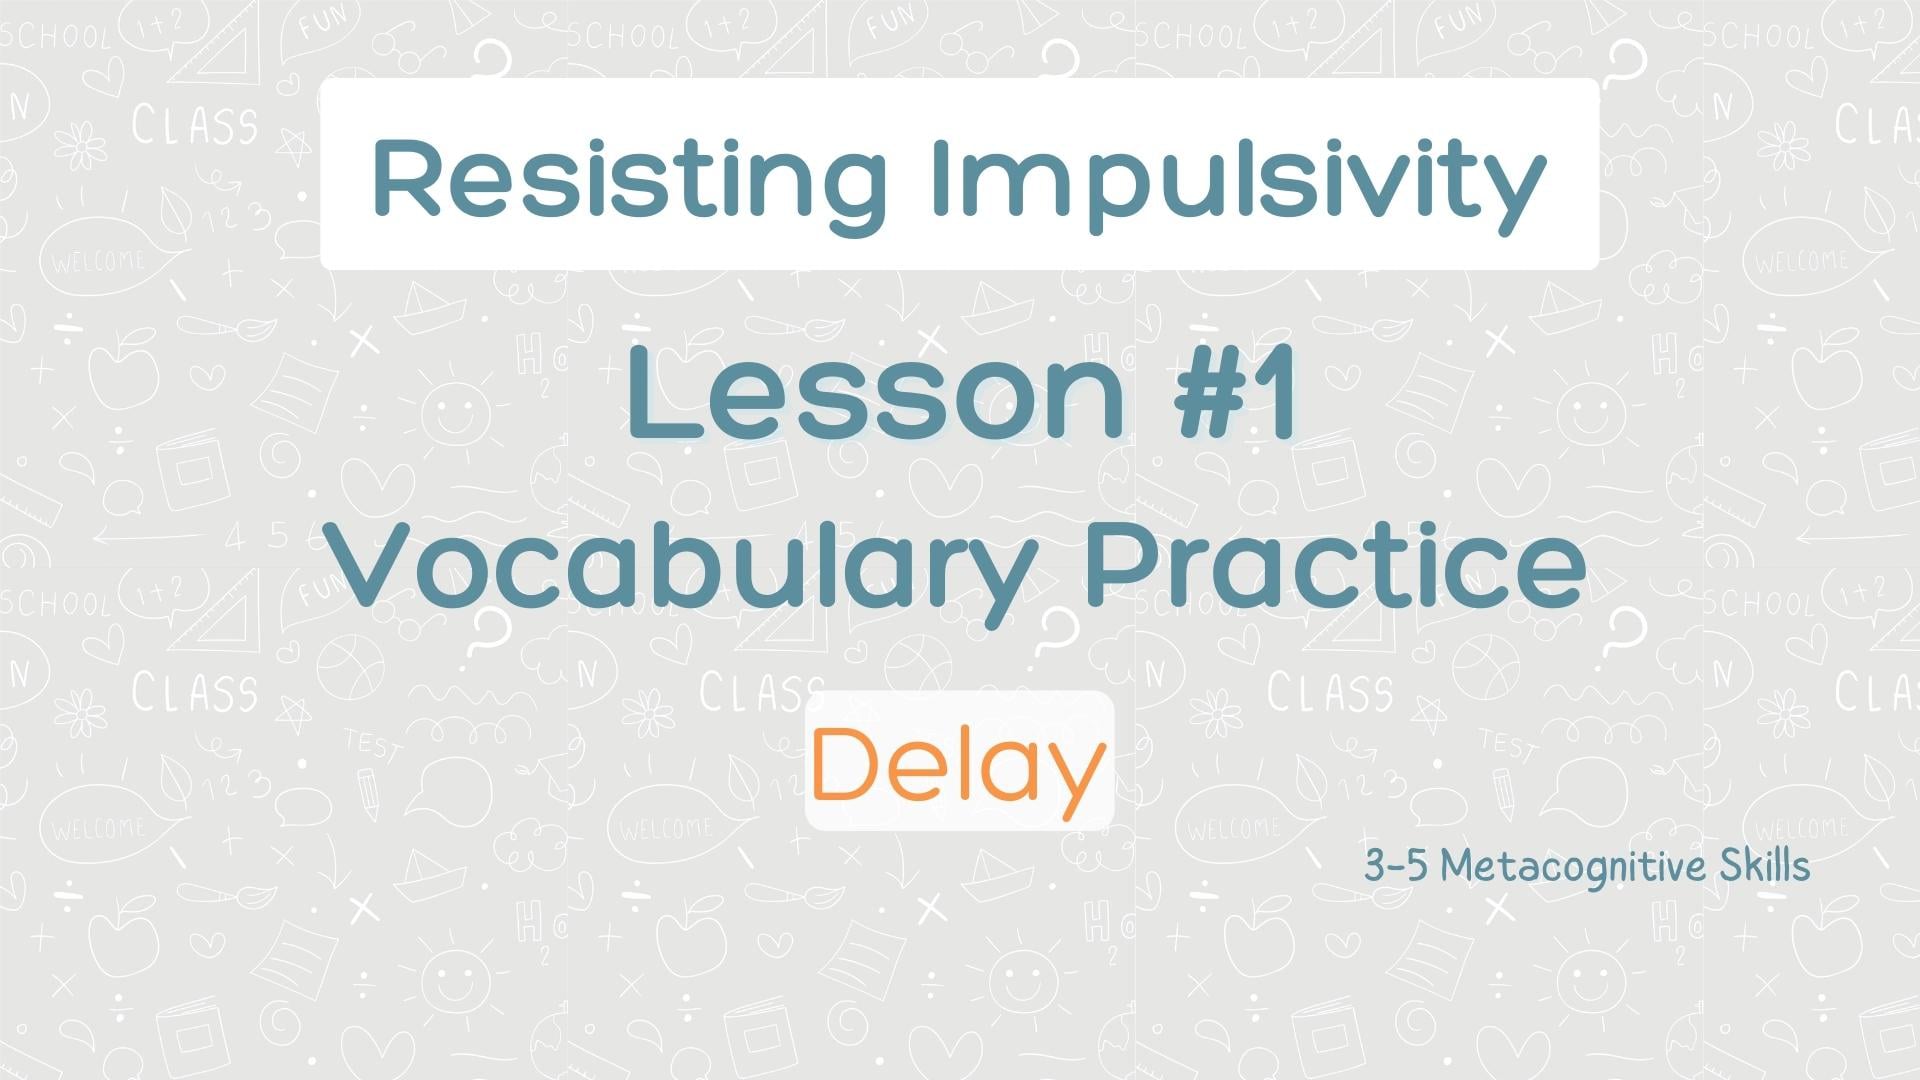 Lesson #1 Vocabulary Practice: Delay video thumbnail